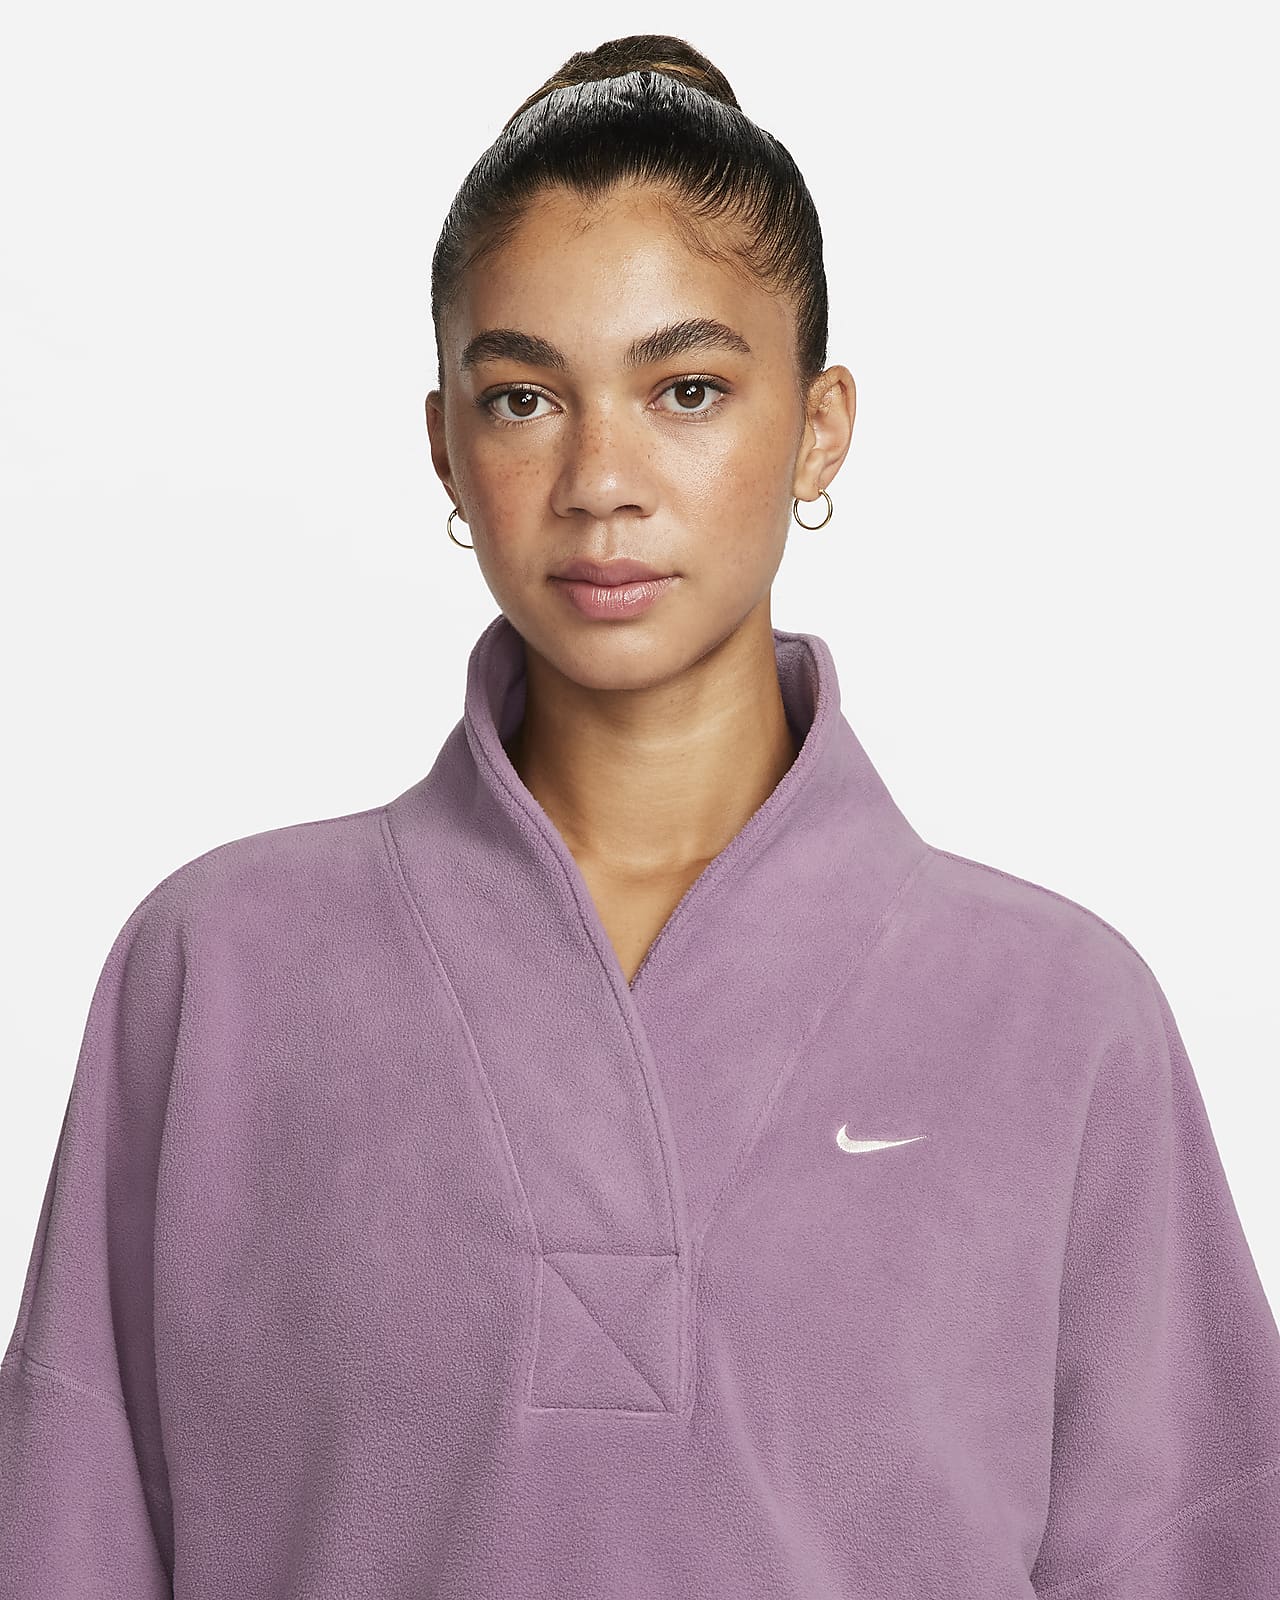 https://static.nike.com/a/images/t_PDP_1280_v1/f_auto,q_auto:eco/b2df6df9-ff04-4bf9-874c-aae48d73ee28/therma-fit-one-womens-oversized-long-sleeve-fleece-top-jhXXV2.png